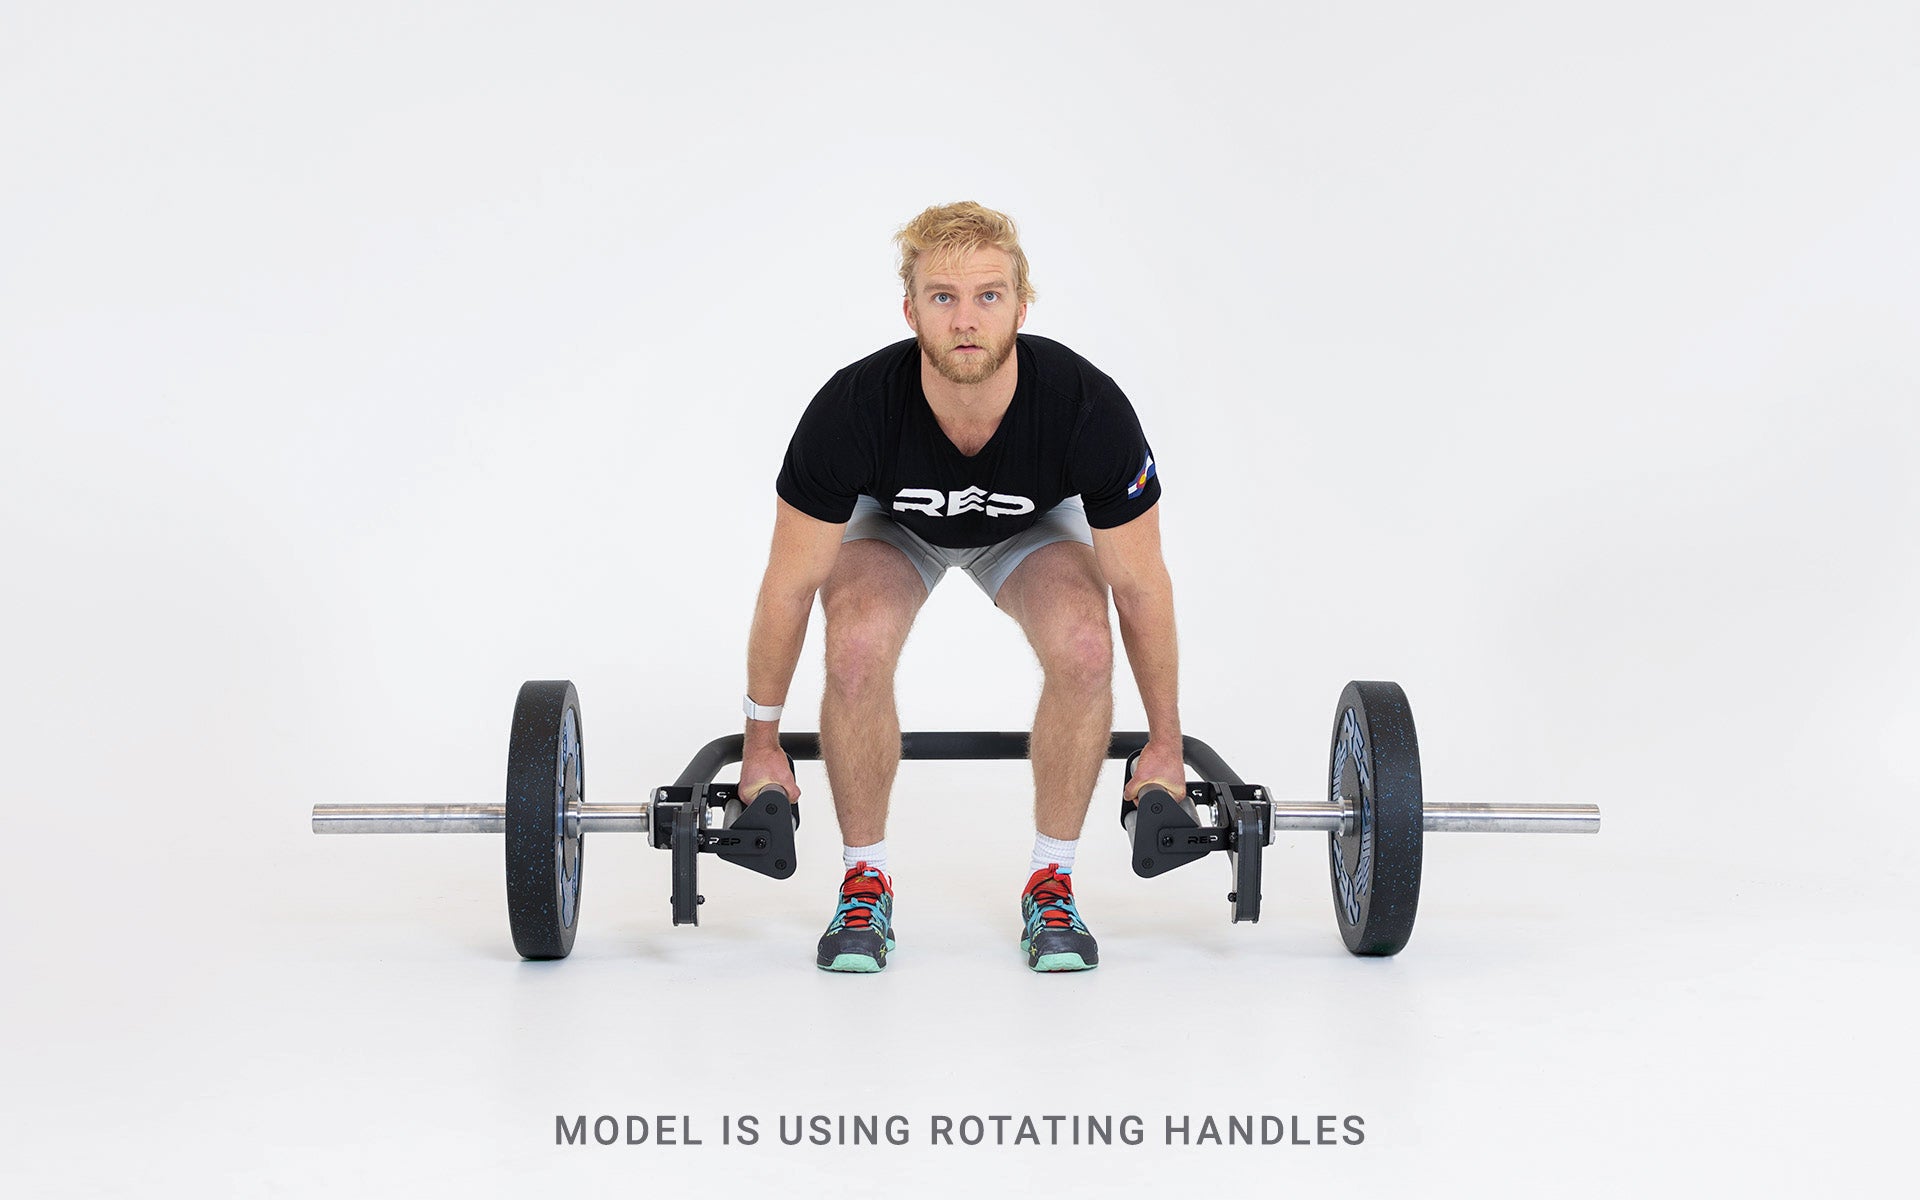 Lifter set up for a deadlift using the open trap bar with rotating handles.